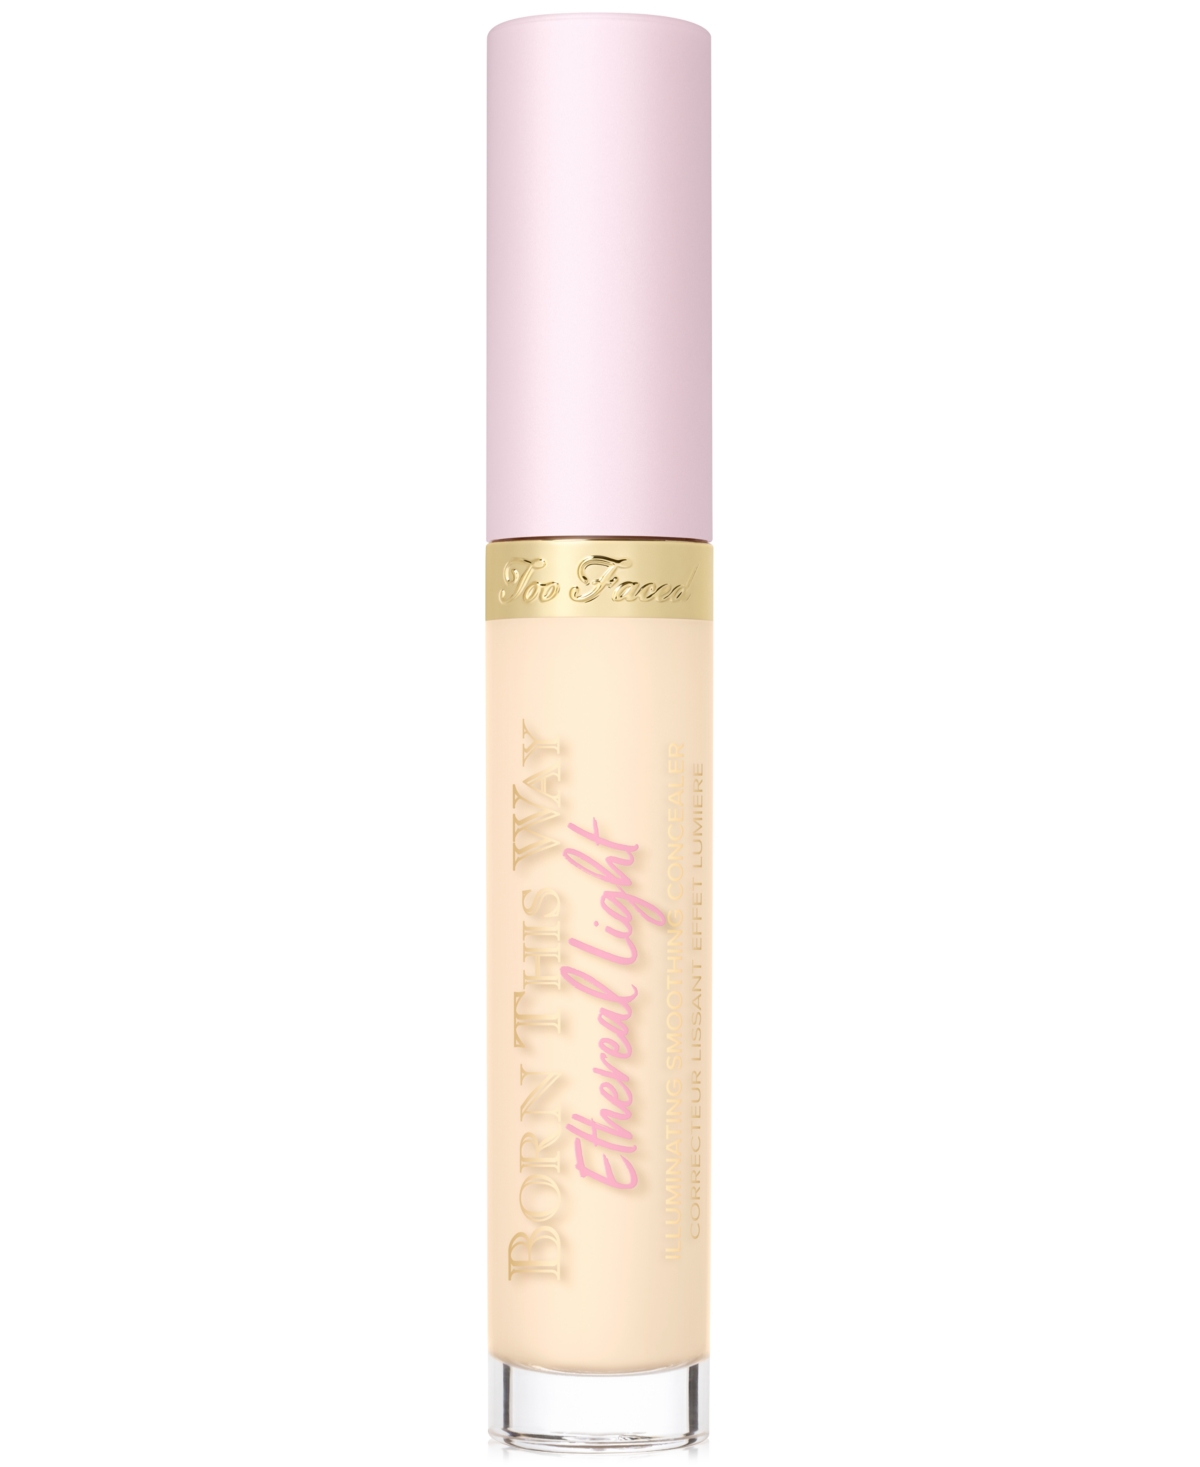 Too Faced Born This Way Ethereal Light Illuminating Smoothing Concealer In Vanilla Wafer - Fair With Golden Underto